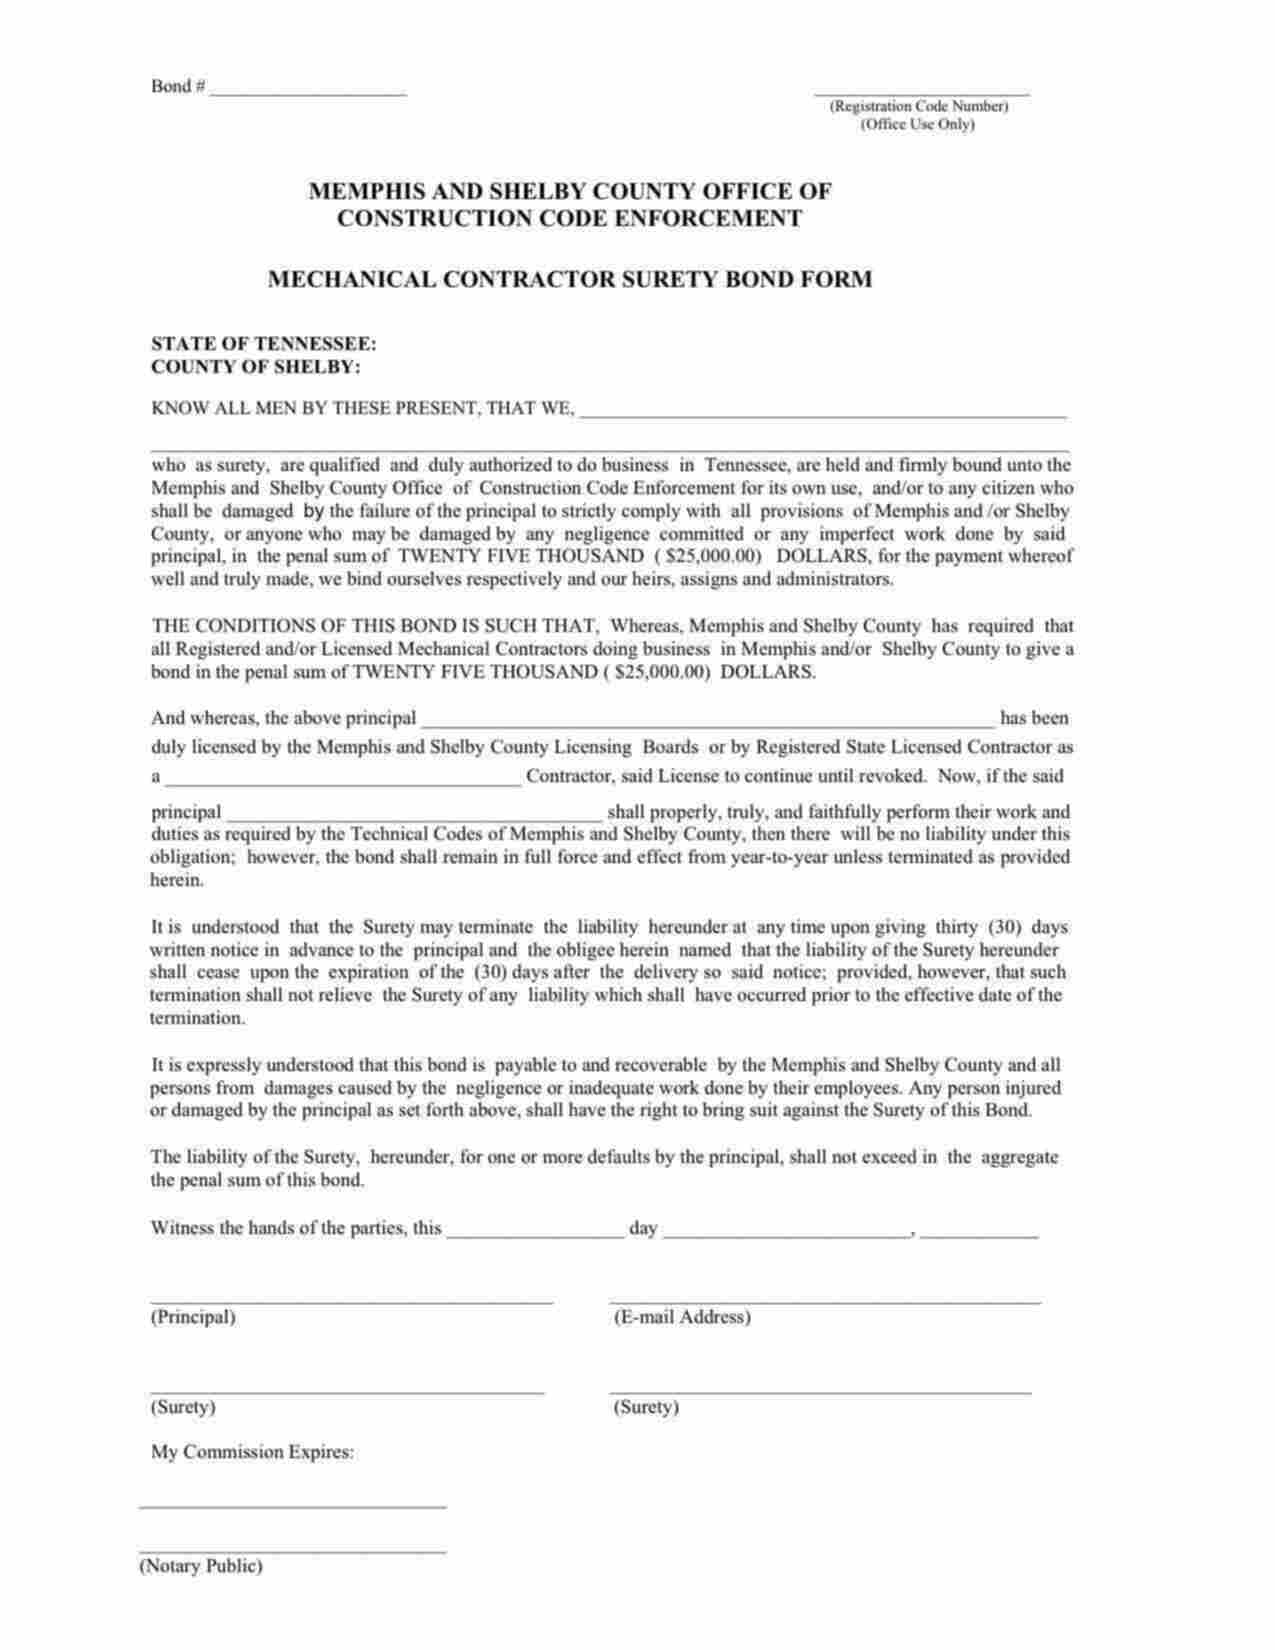 Tennessee Mechanical Contractor Bond Form